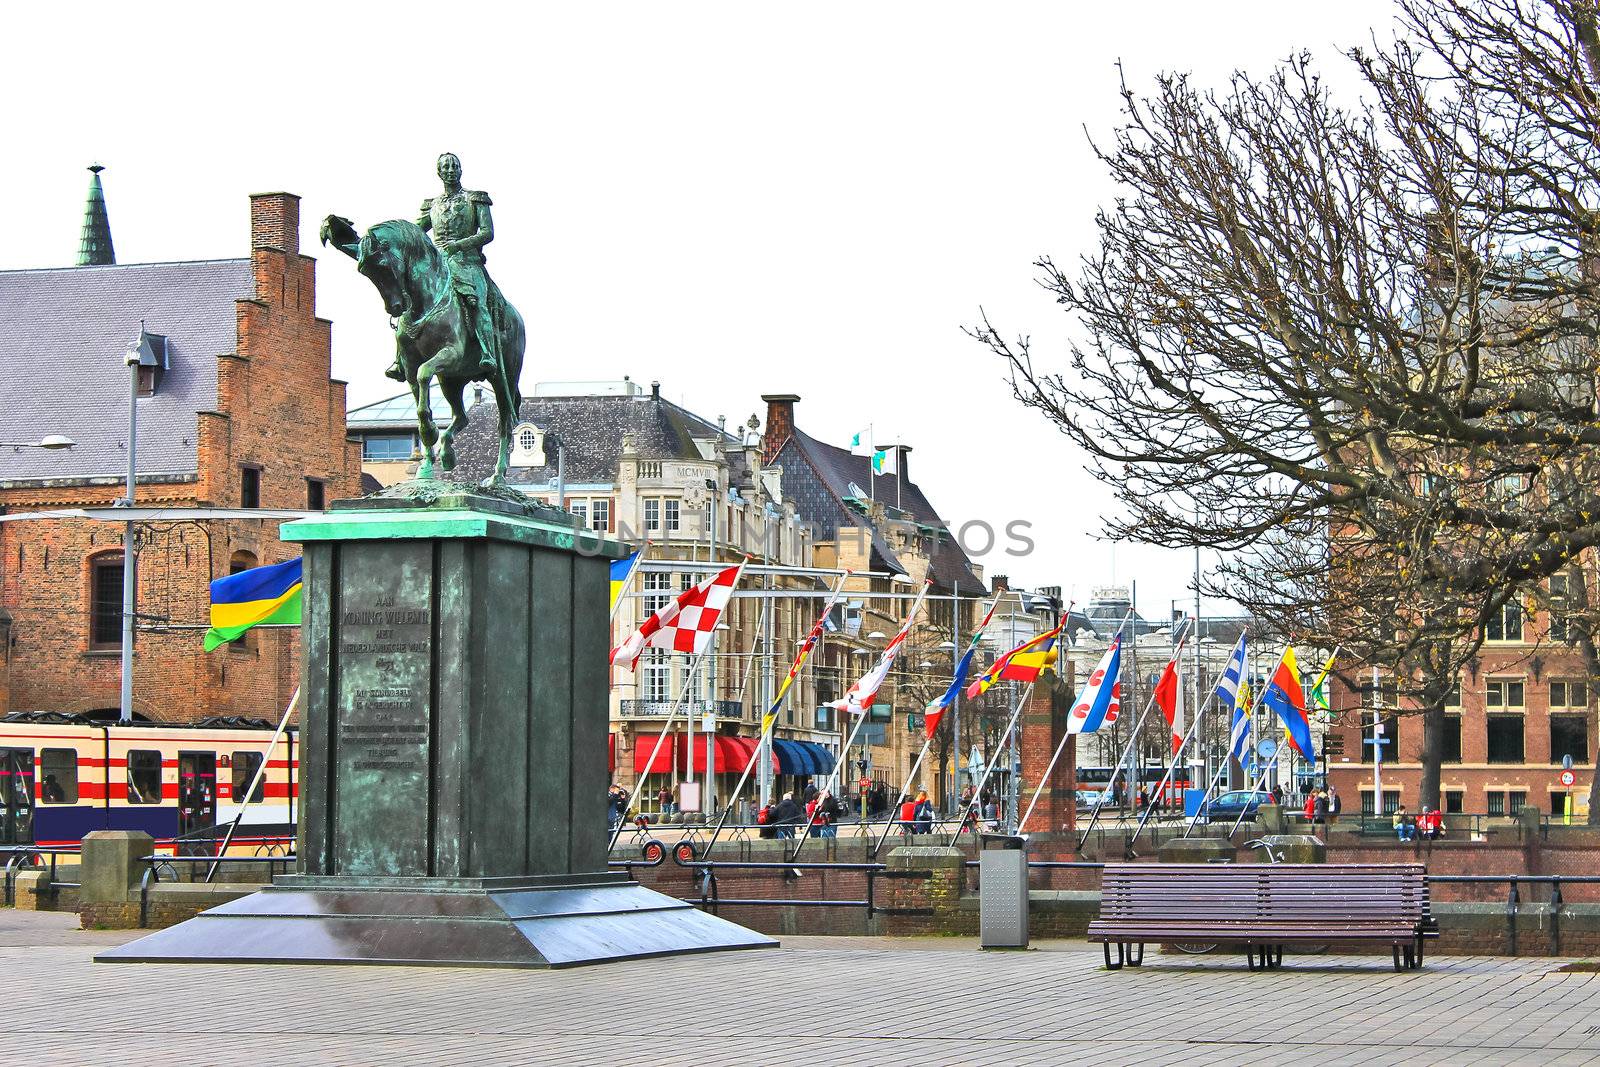 Equestrian statue of King William II, the Hague. Netherlands by NickNick